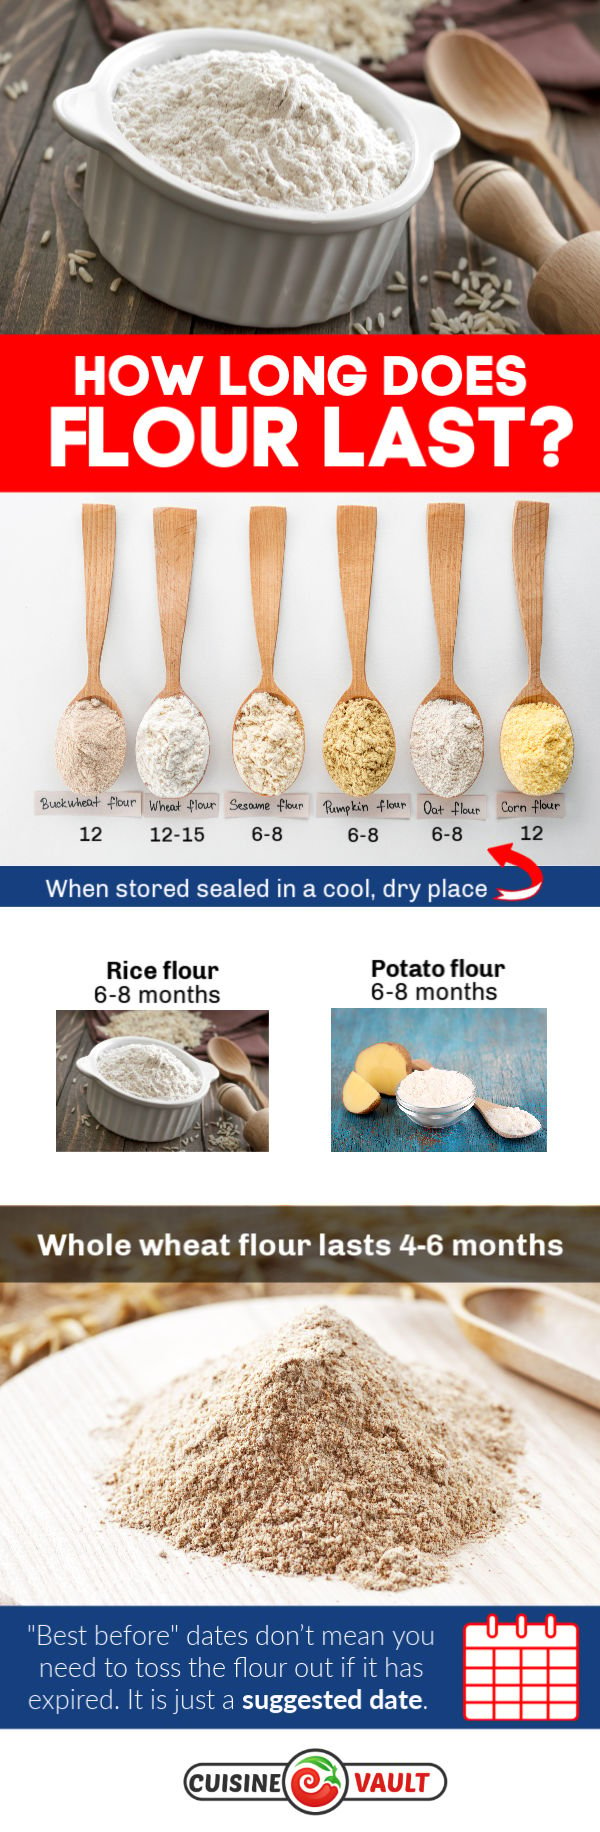 An infographic about how long flour lasts.